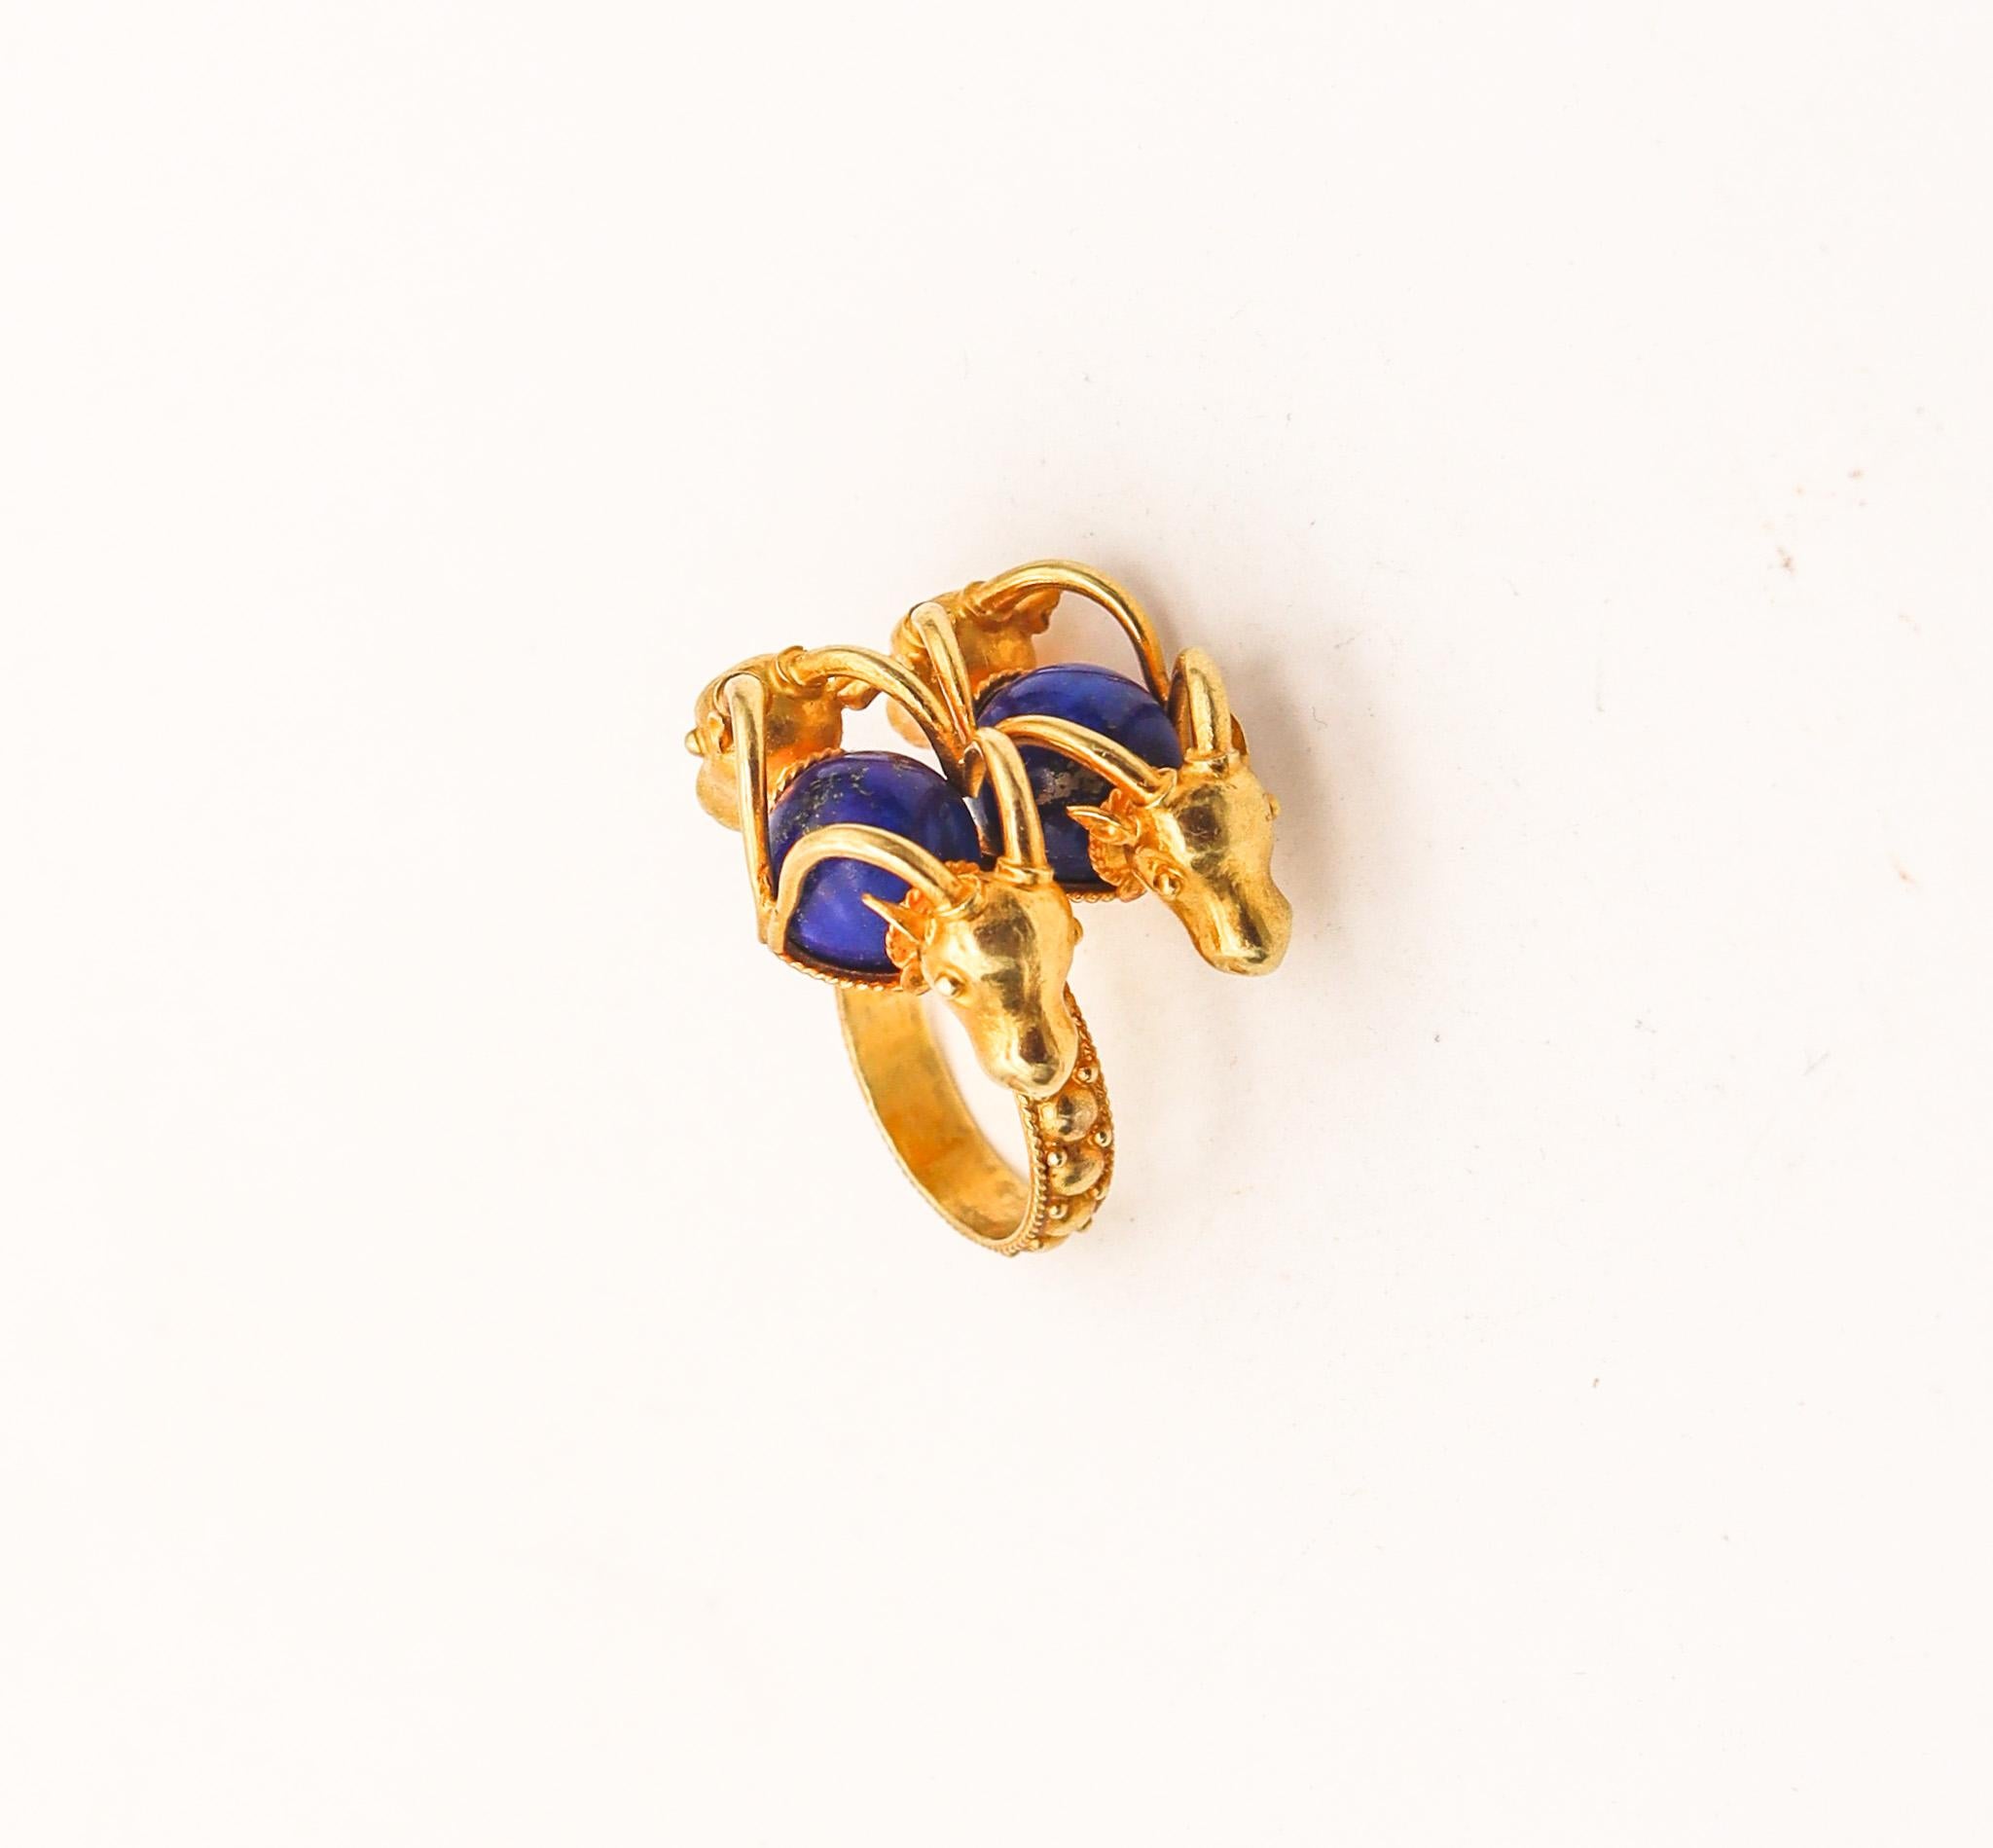 Rams cocktail ring designed by Zolotas.

A sculptural cocktail ring, created in Athens Greece by the jewelry makers of Zolotas, back in the late 1970's. This gorgeous ring is a real statement designed in three dimensions with ancient Greek patterns